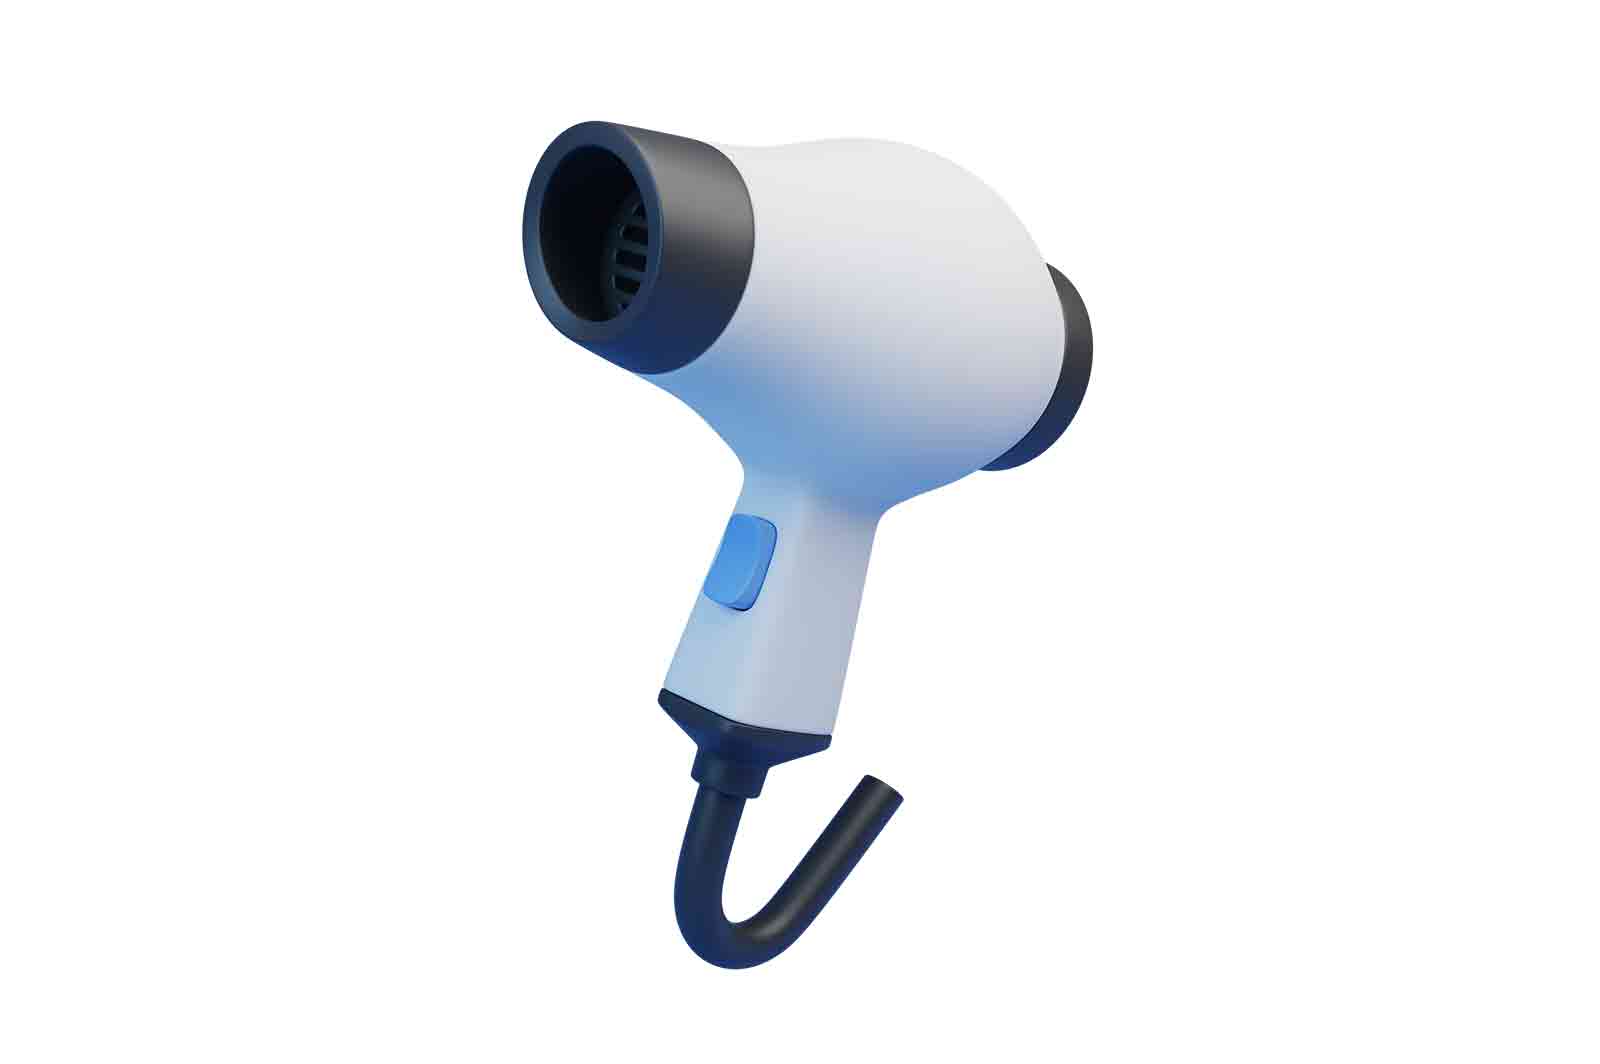 Beauty salon hair dryer 3d rendered illustration. Hairdryer blower device. Beauty electrical device for drying hair